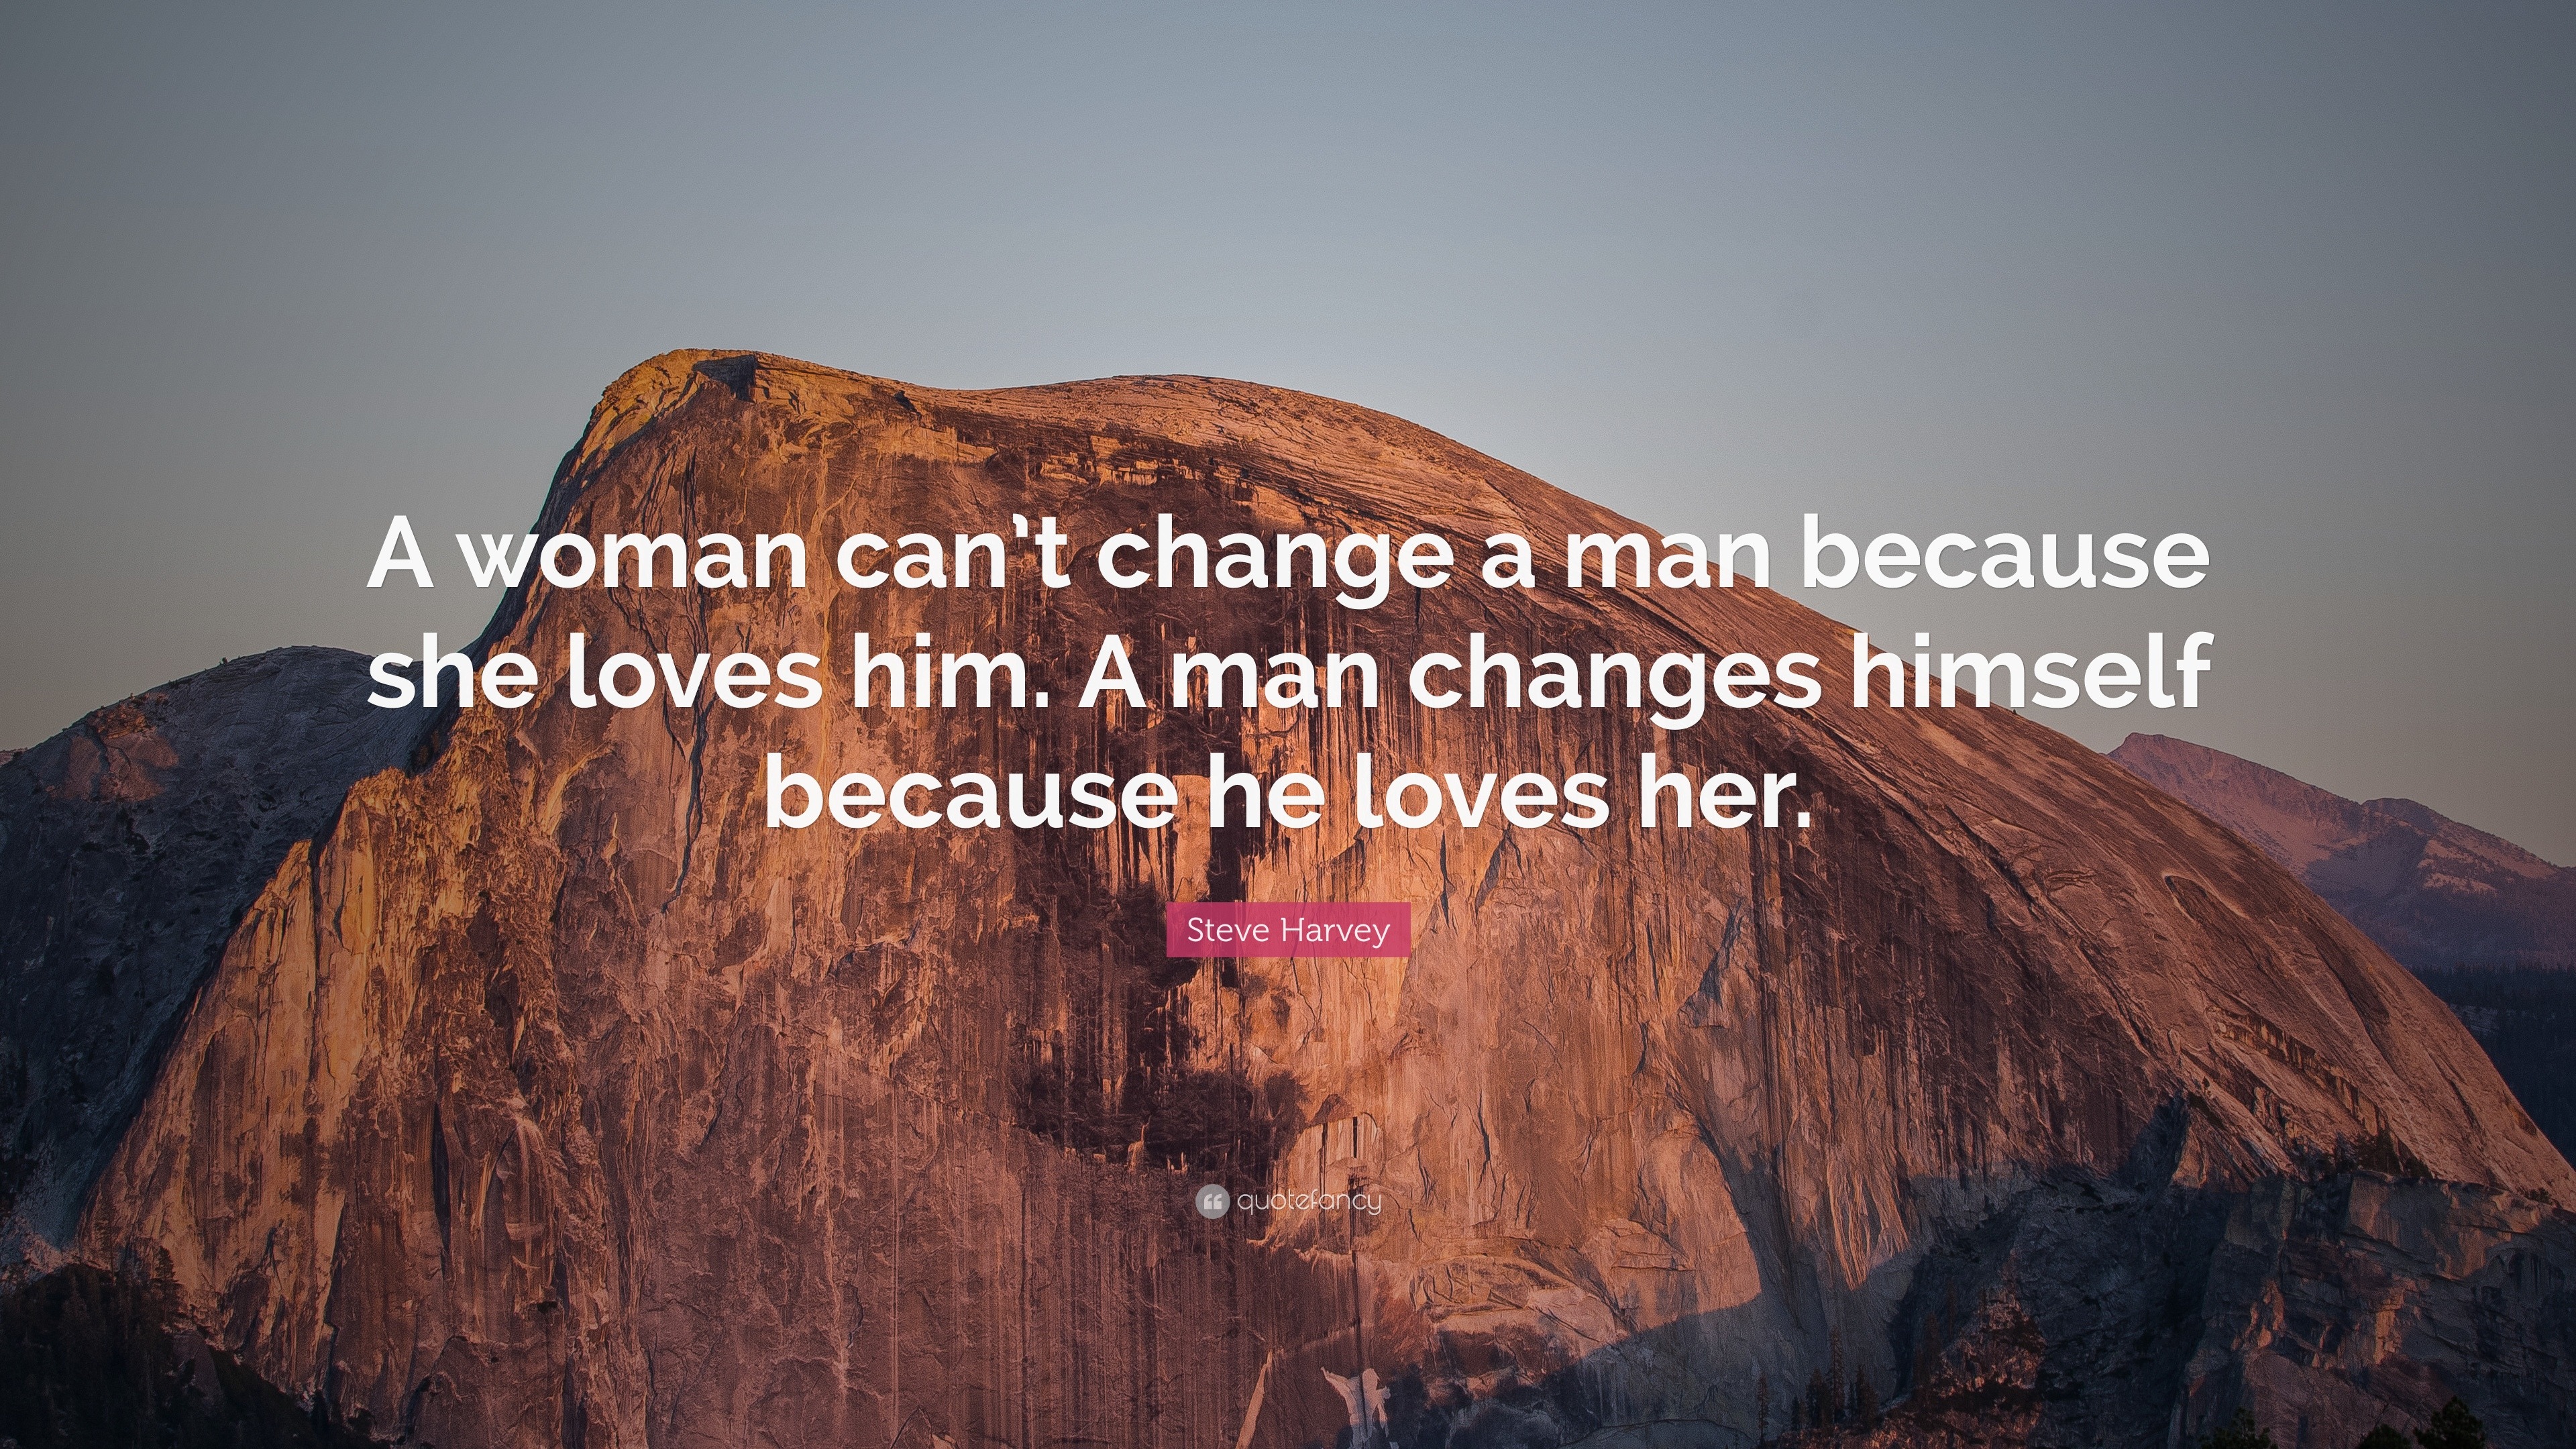 Steve Harvey Quote “A woman can t change a man because she loves